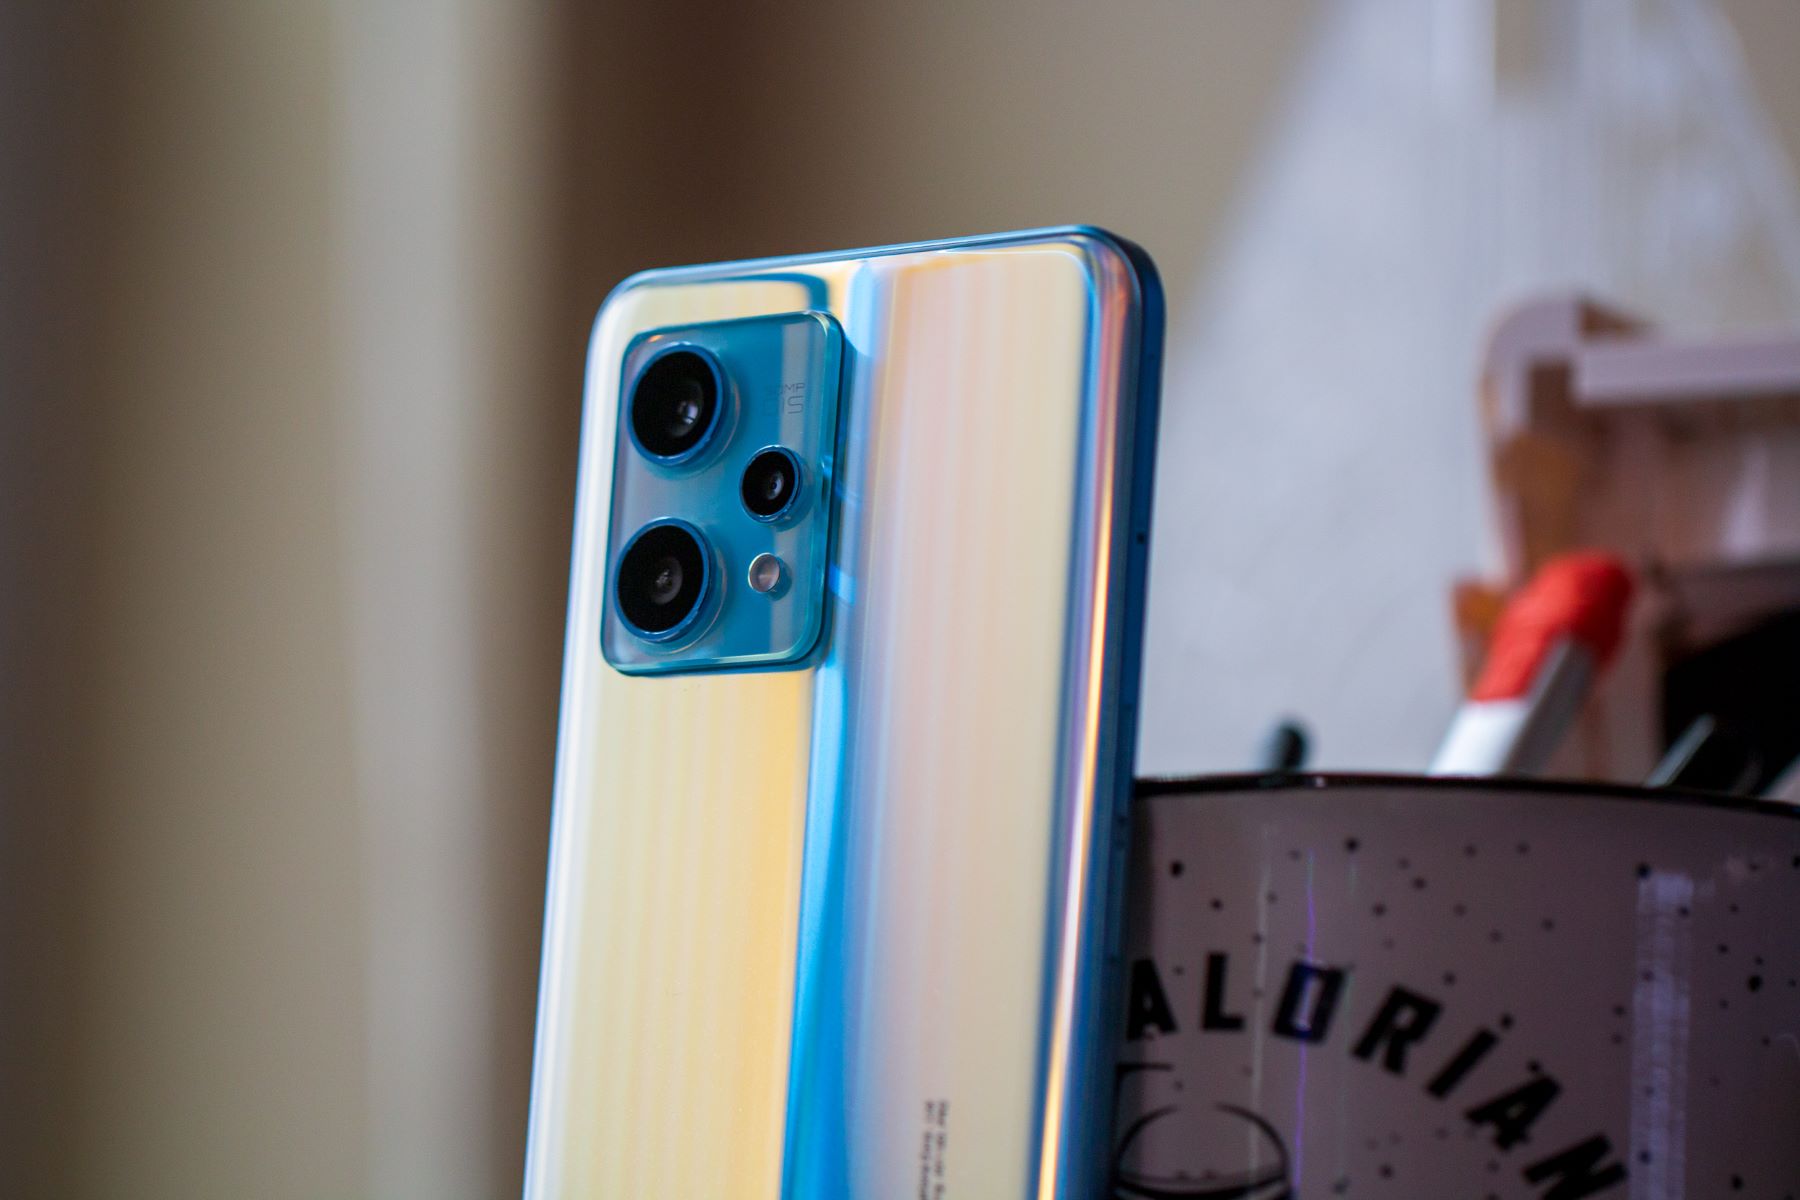 Discovering The Latest Realme Phone: A Quick Guide